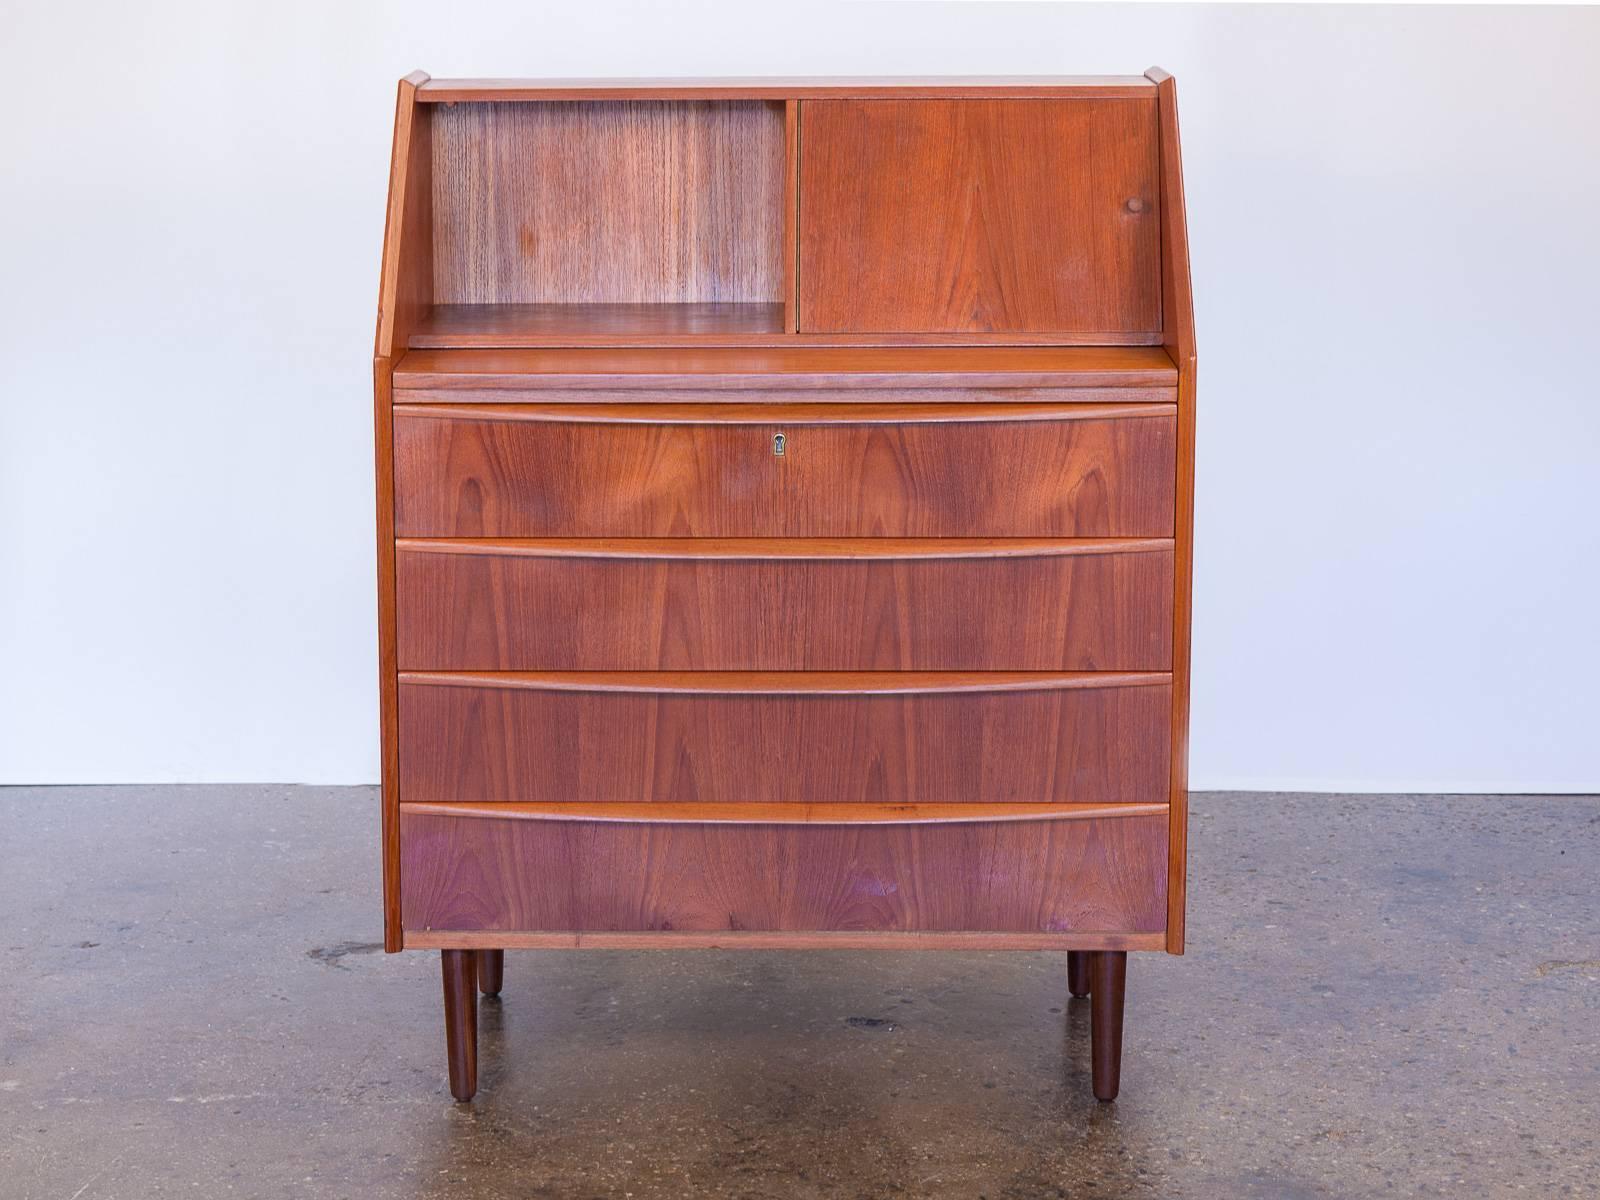 Scandinavian teak secretary. Gorgeous teak wood selection is rich and bright. Top right side opens to reveal a mirror and a reflective shelf for small storage. Four dresser drawers along with a desk surface when top is pulled out. A petite-sized